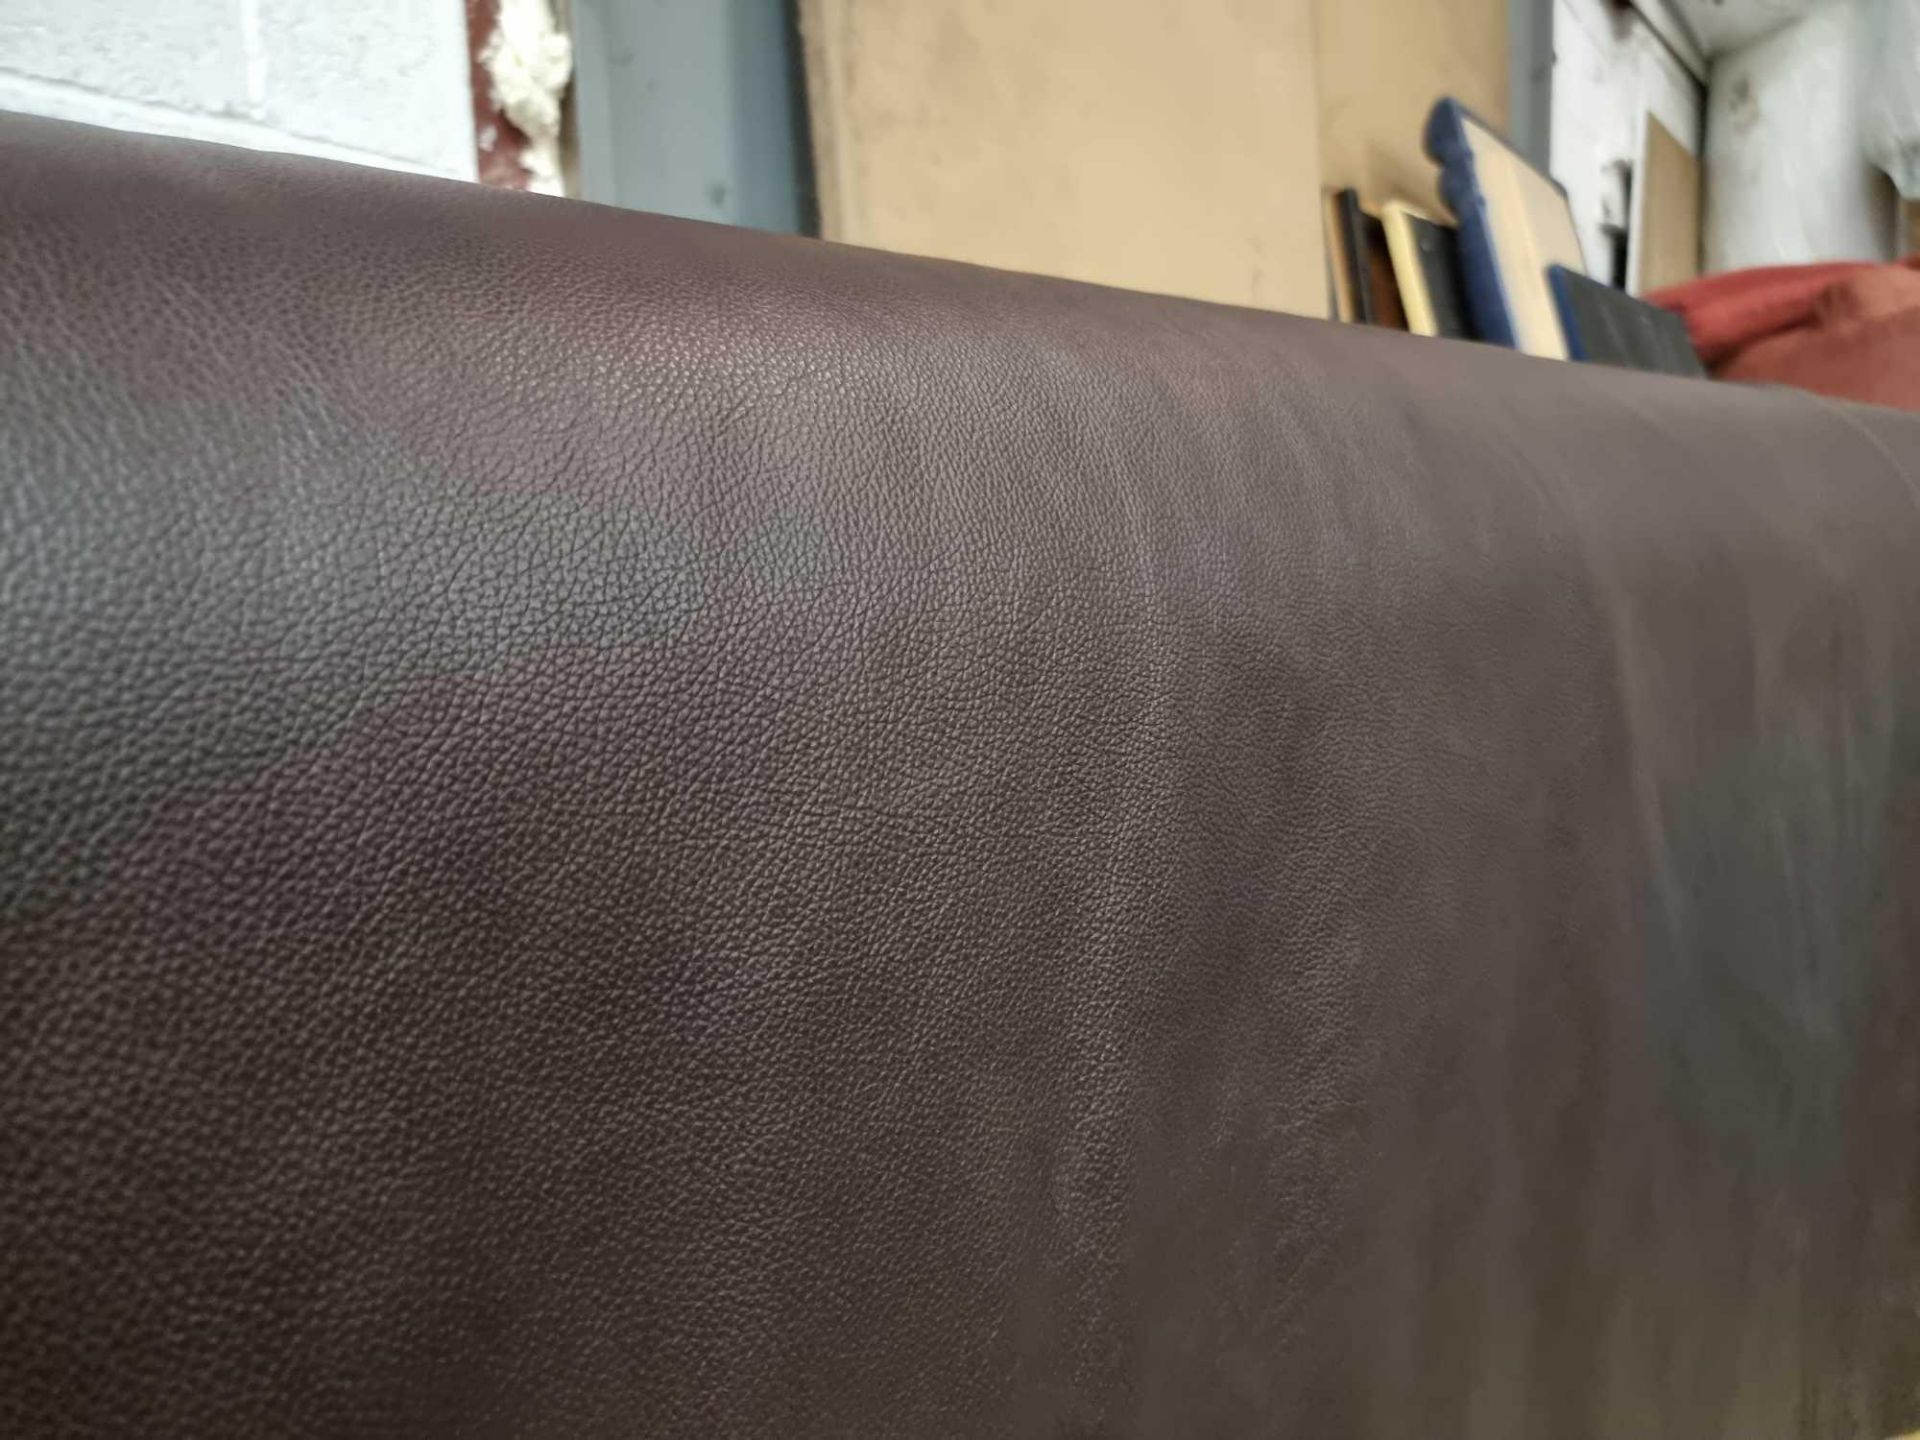 Mastrotto Hudson Chocolate Leather Hide approximately 3.51mÂ² 1.95 x 1.8cm